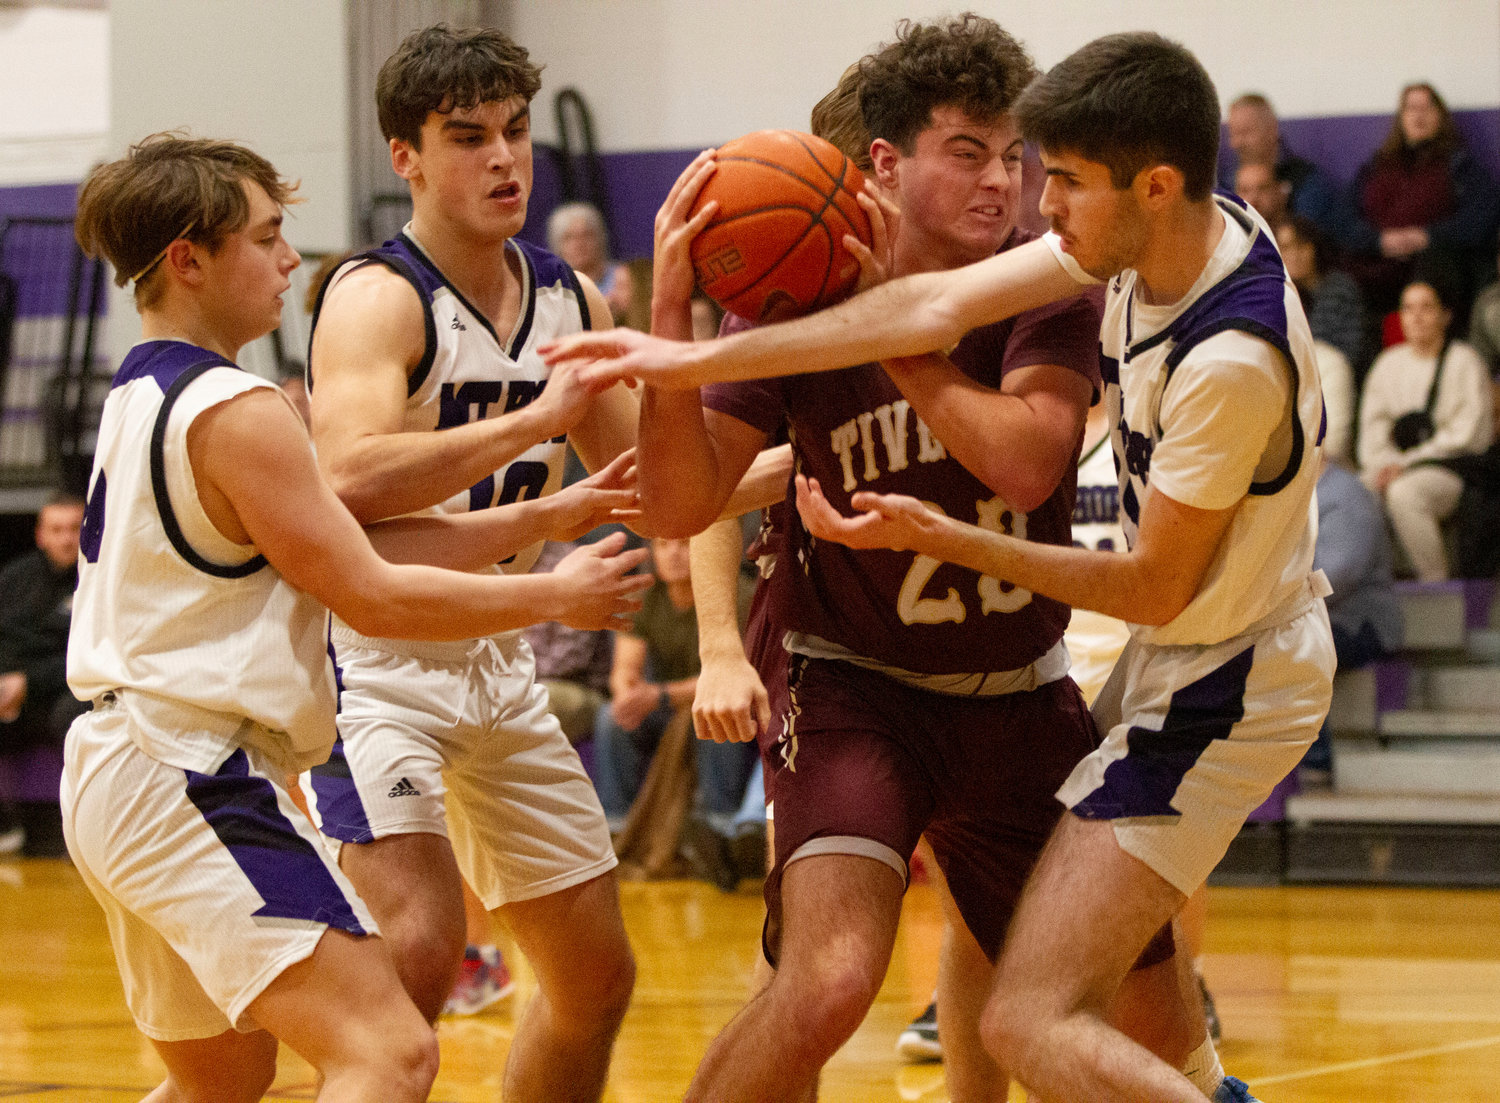 Huskies defenders Matt MacDougall (left), Ben Calouro and James Rustici fight for a rebound with Tiverton's Ryan Poland in a physical Division II match up at Mt. Hope High School on Thursday night. Tiverton won the game 56-42.